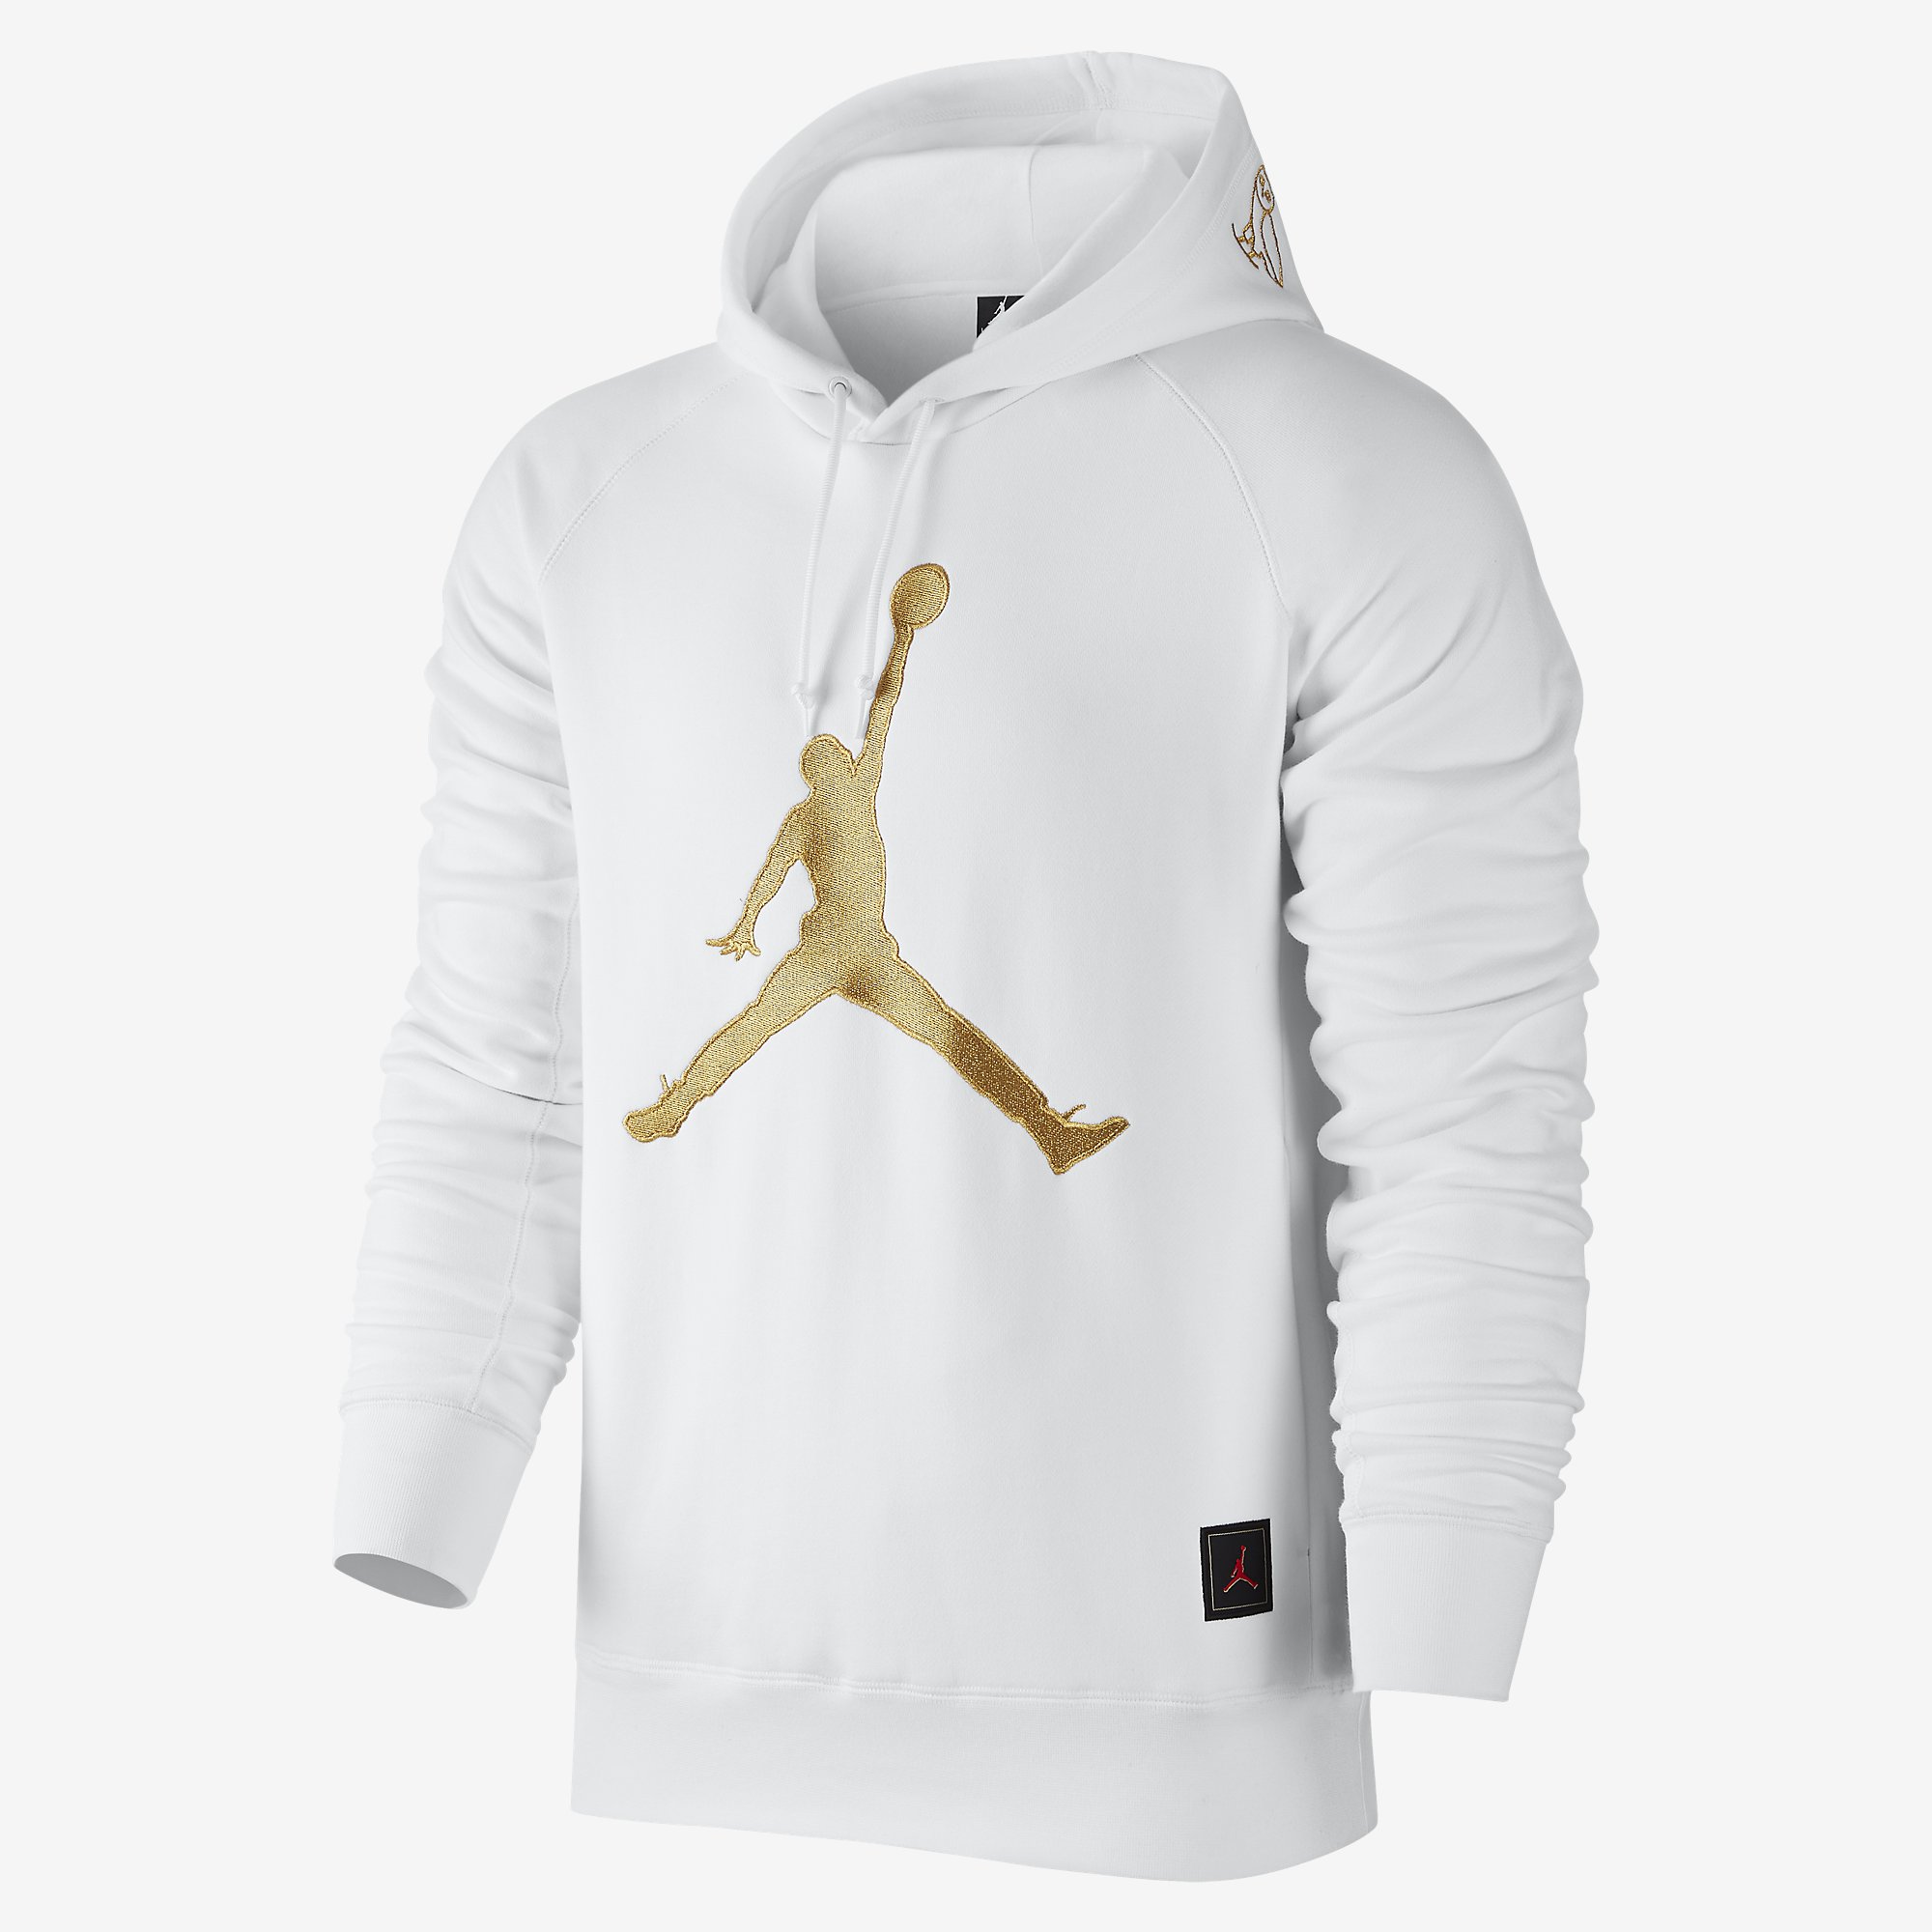 white and gold jordan outfit